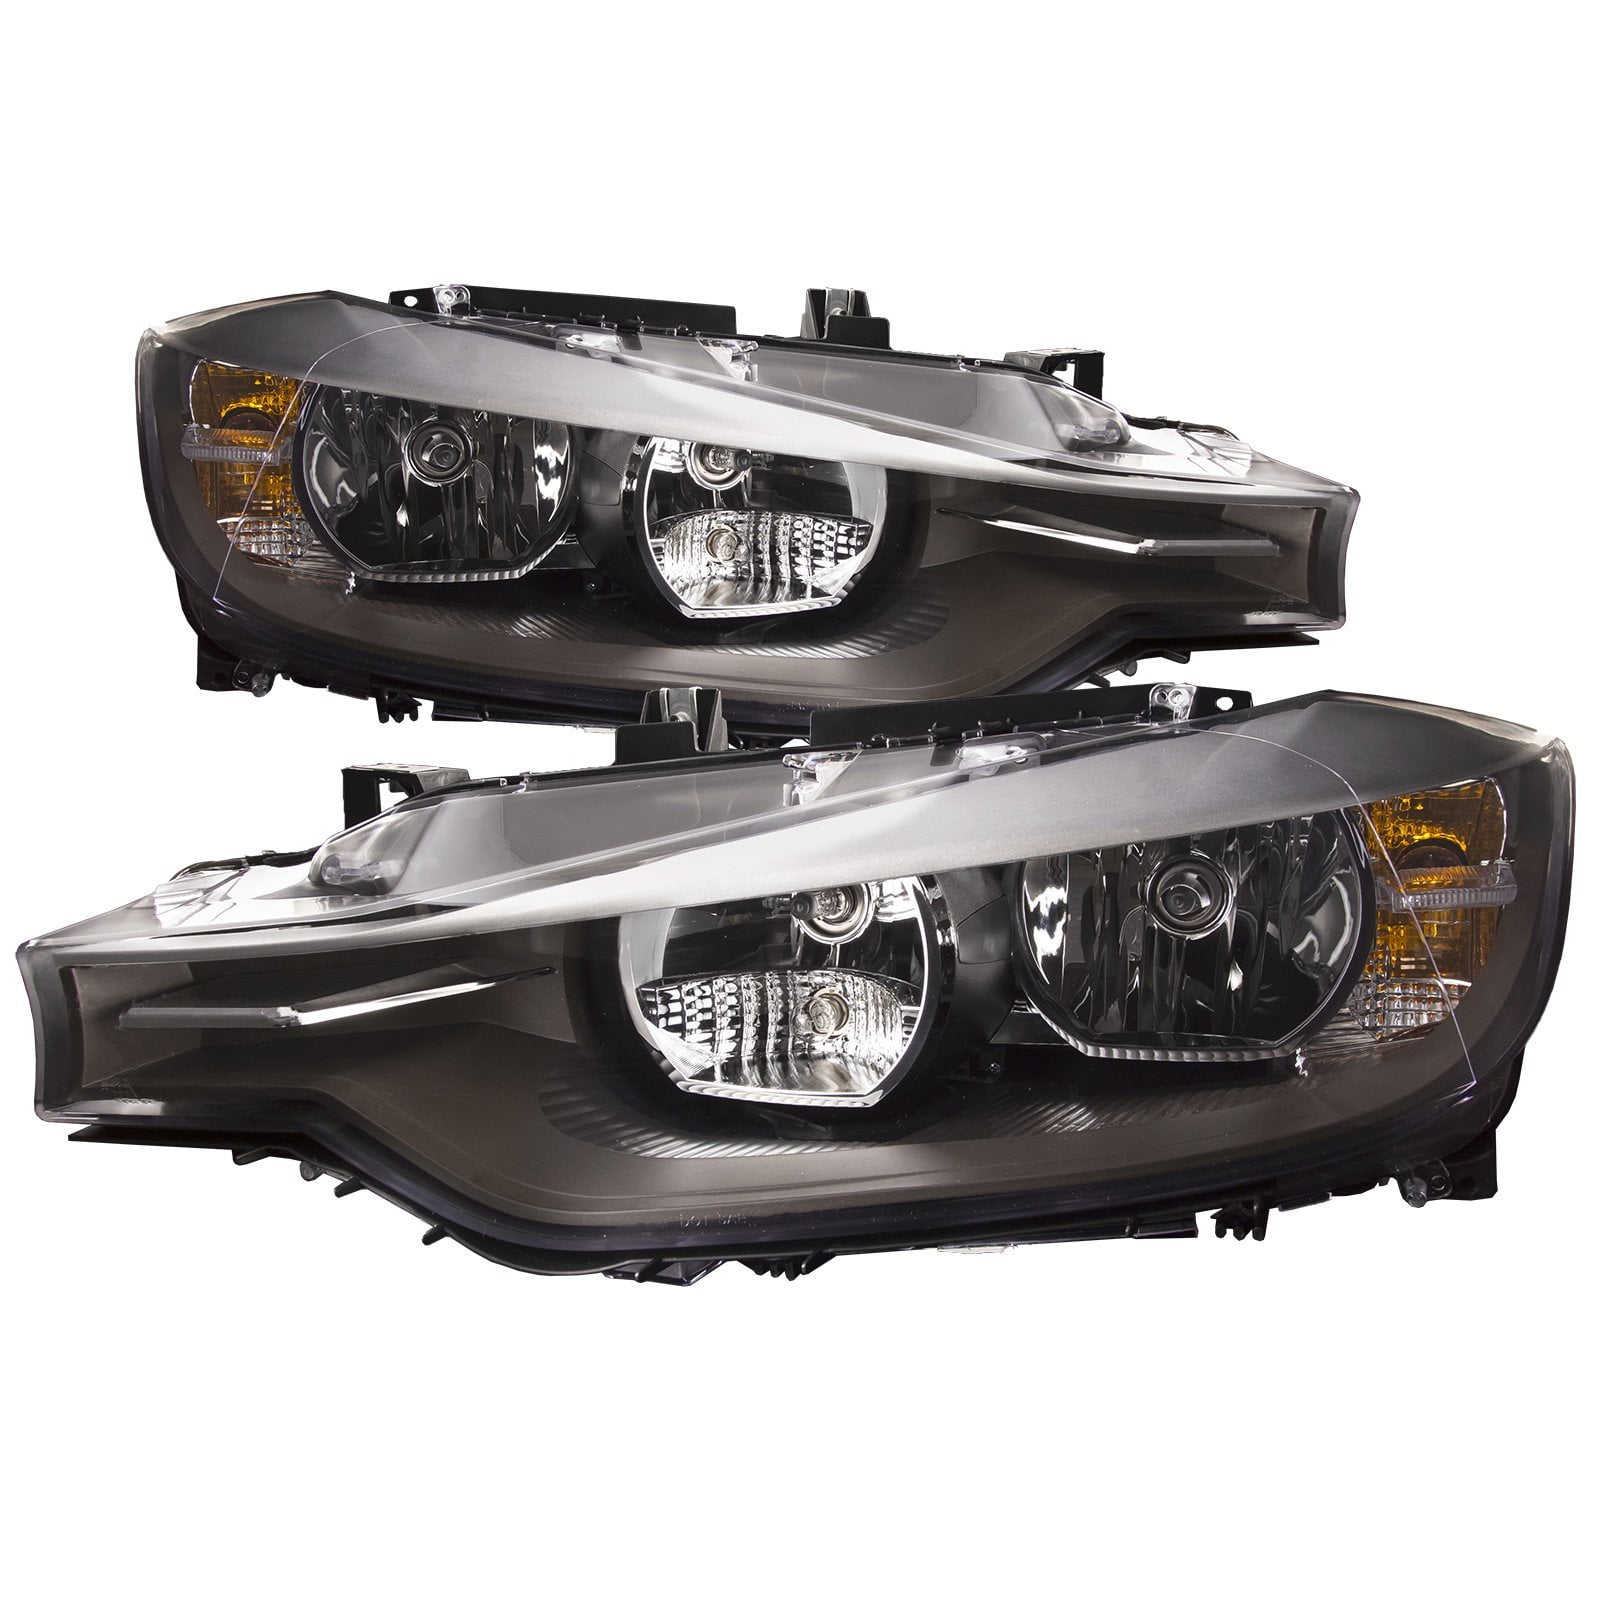 HEADLIGHTSDEPOT Chrome Housing Halogen Headlight Compatible with Ford Taurus 2000-2007 Includes Left Driver and Right Passenger Side Headlamps